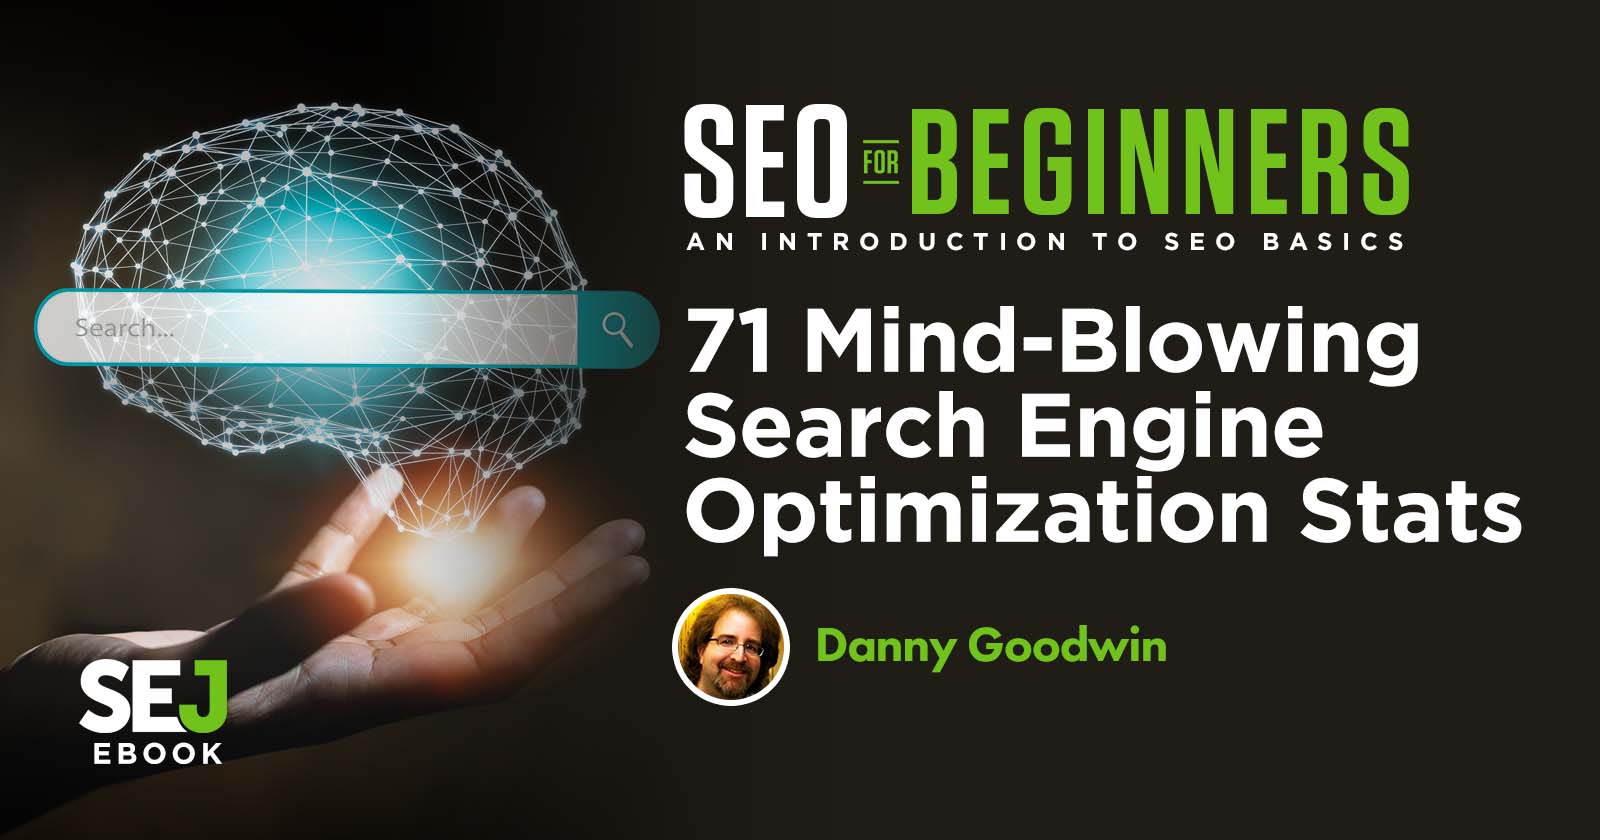 Beginner's Guide to SEO (Search Engine Optimization) - Moz